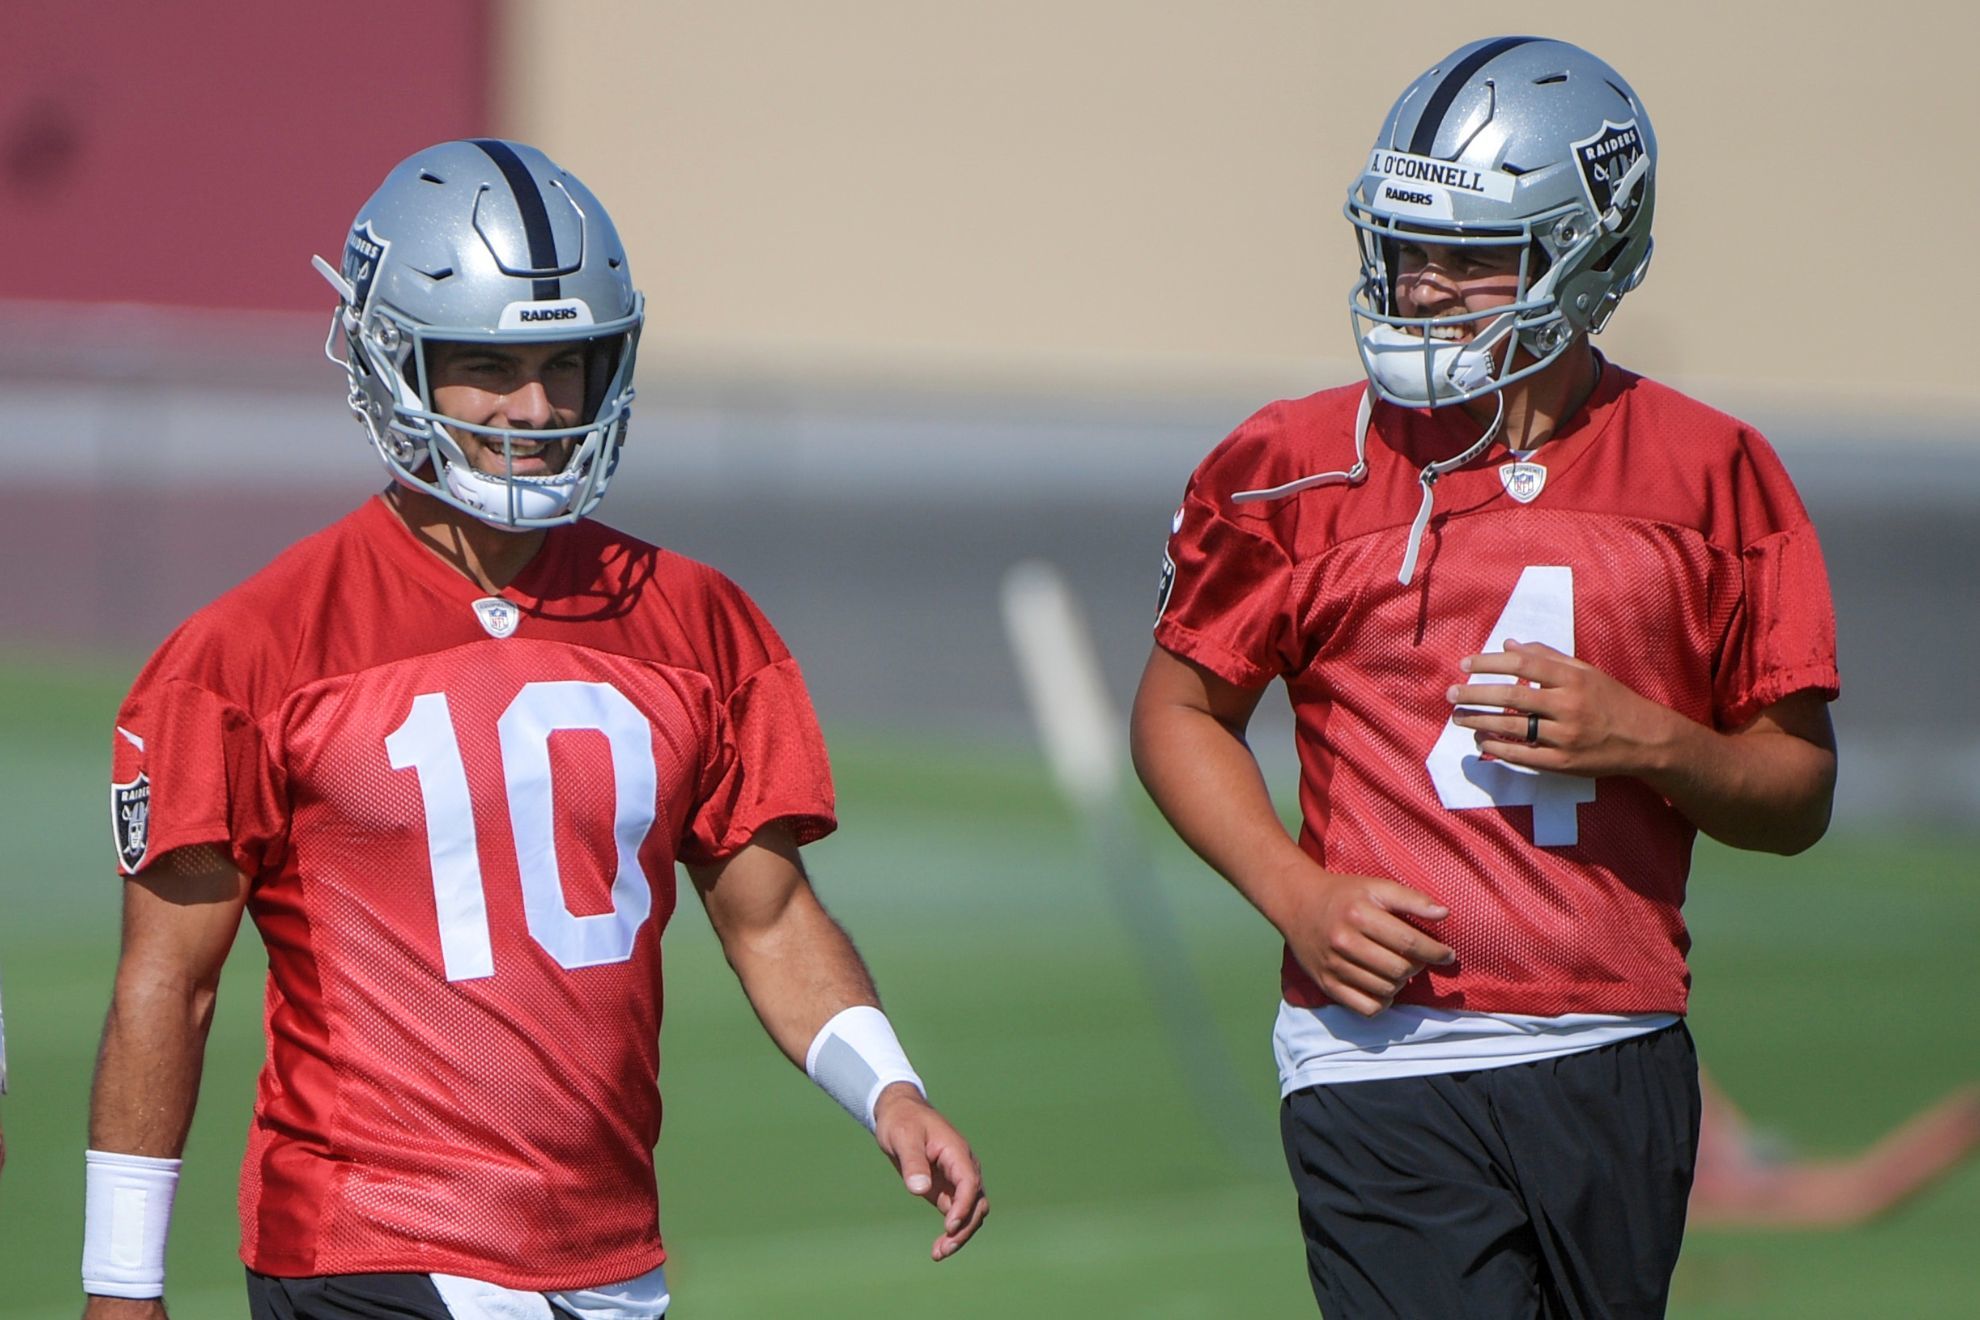 Jimmy Garoppolo (left) and Aidan O'Connell at practice. The latter is now the Raiders' QB1.